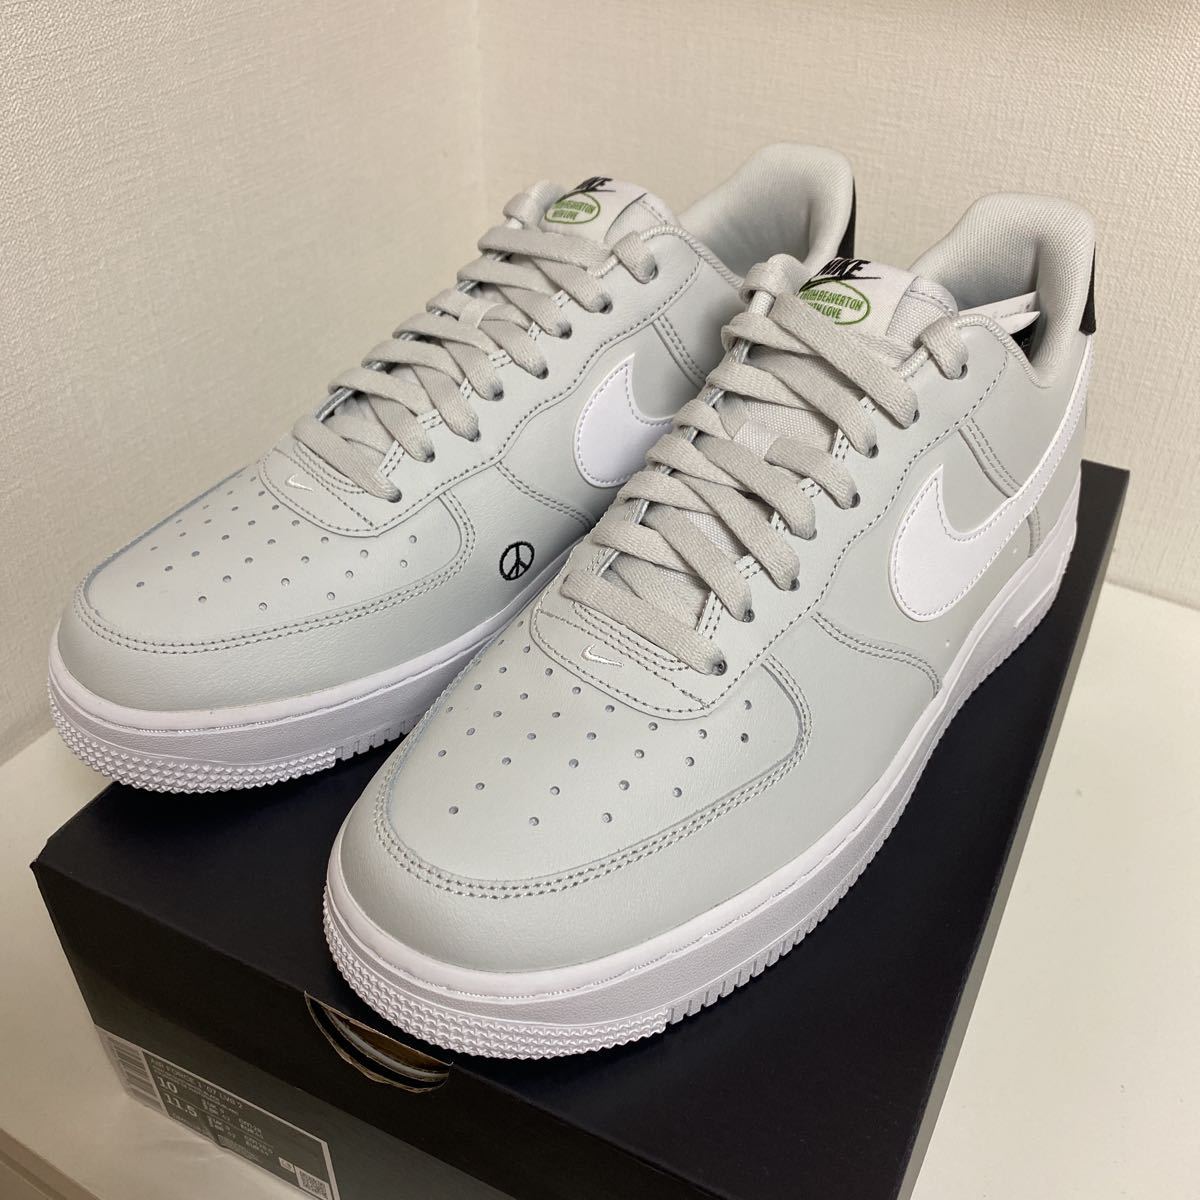 NIKE AIR FORCE 1 '07 LV8 2 HAVE A NIKE DAY EARTH メンズ28cm ナイキ 